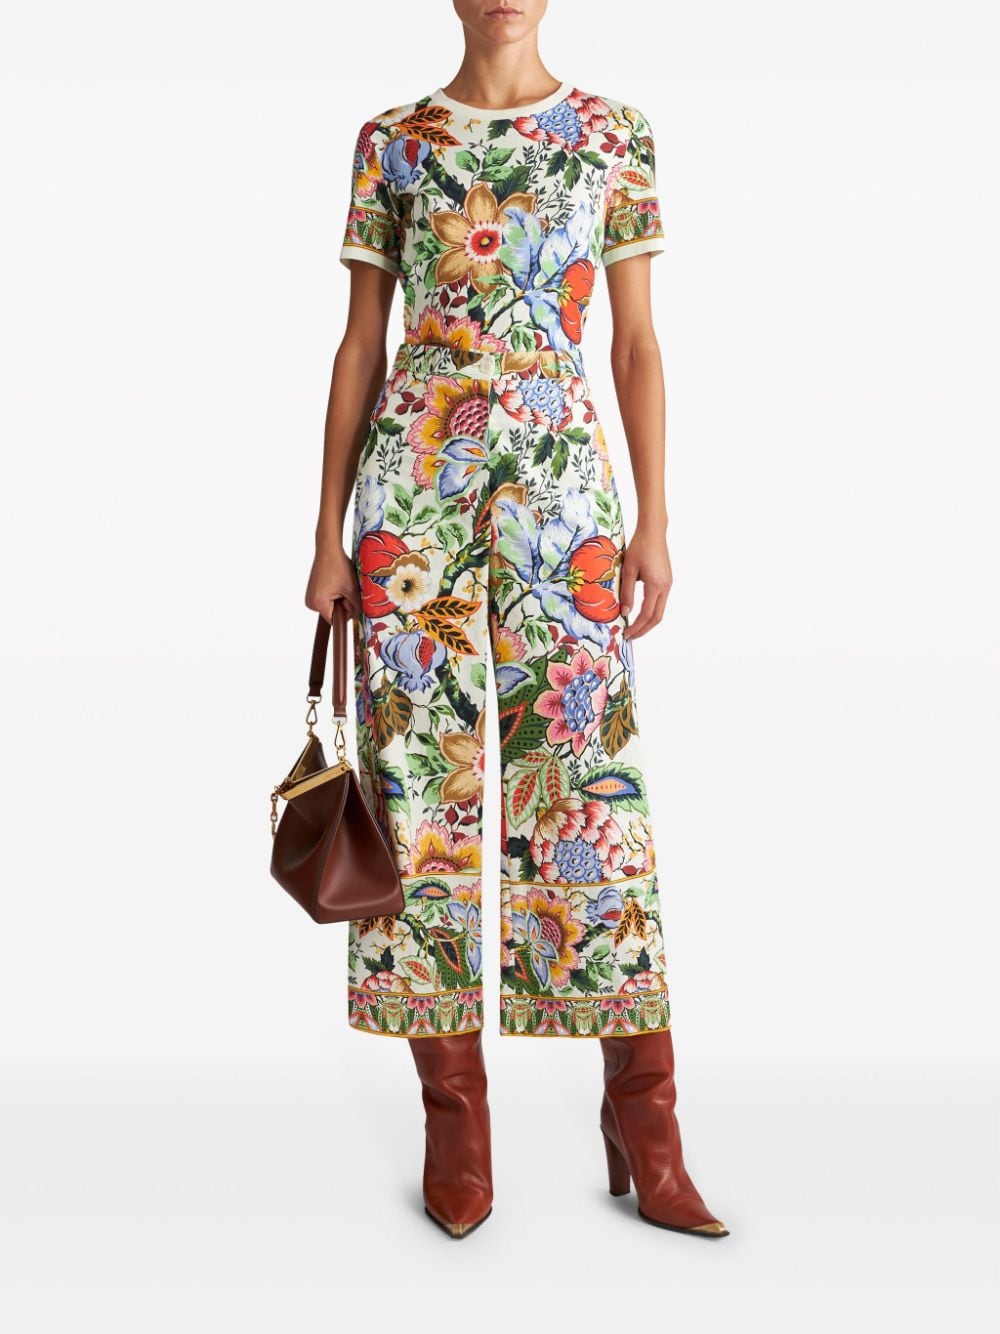 ETRO Floral Print Cotton Culottes for Women in Multicolor - SS24 Collection